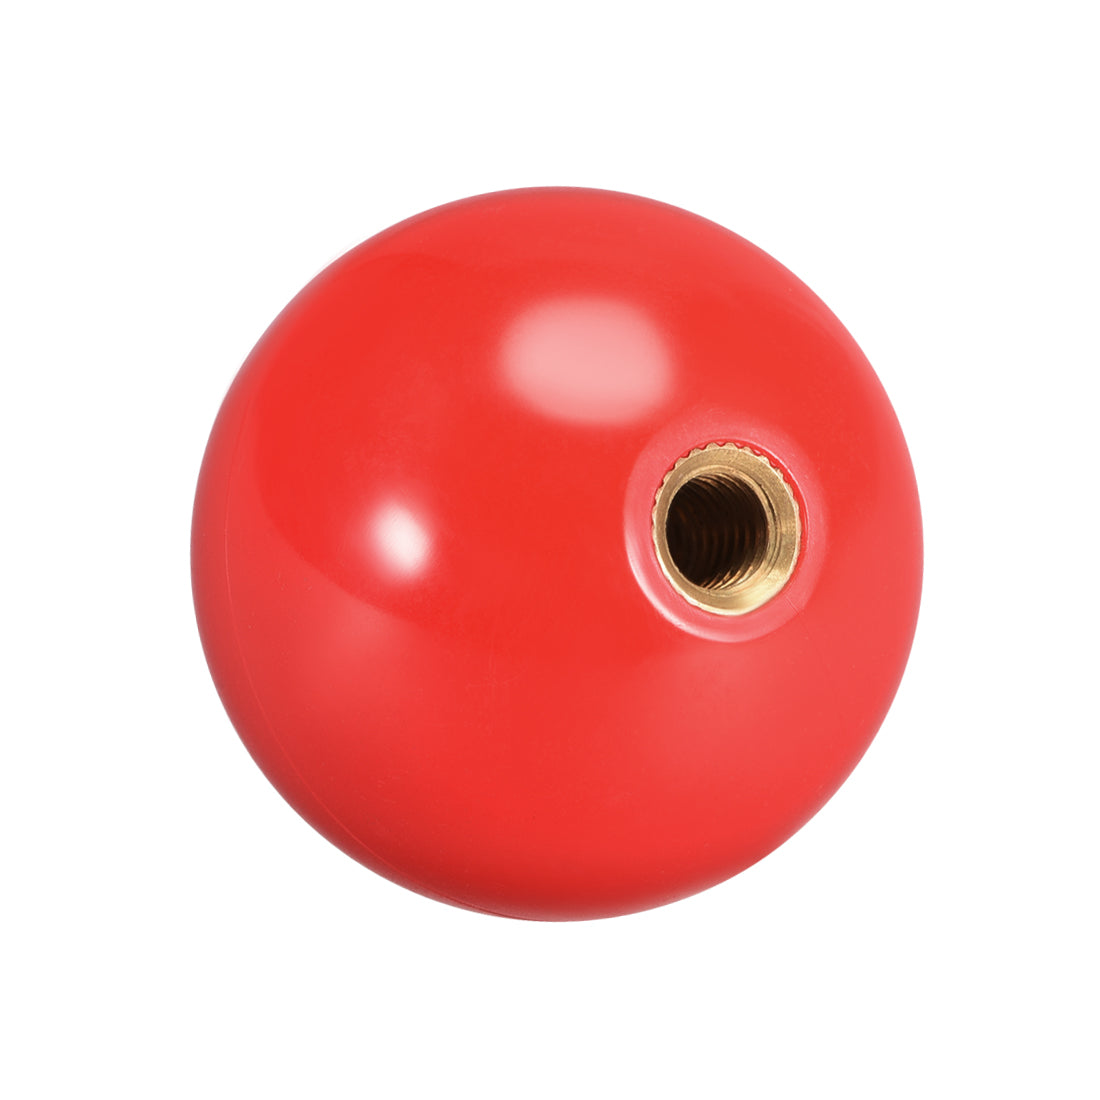 uxcell Uxcell Joystick Ball Top Handle Rocker Round Head Arcade Fighting Game DIY Parts Replacement Red